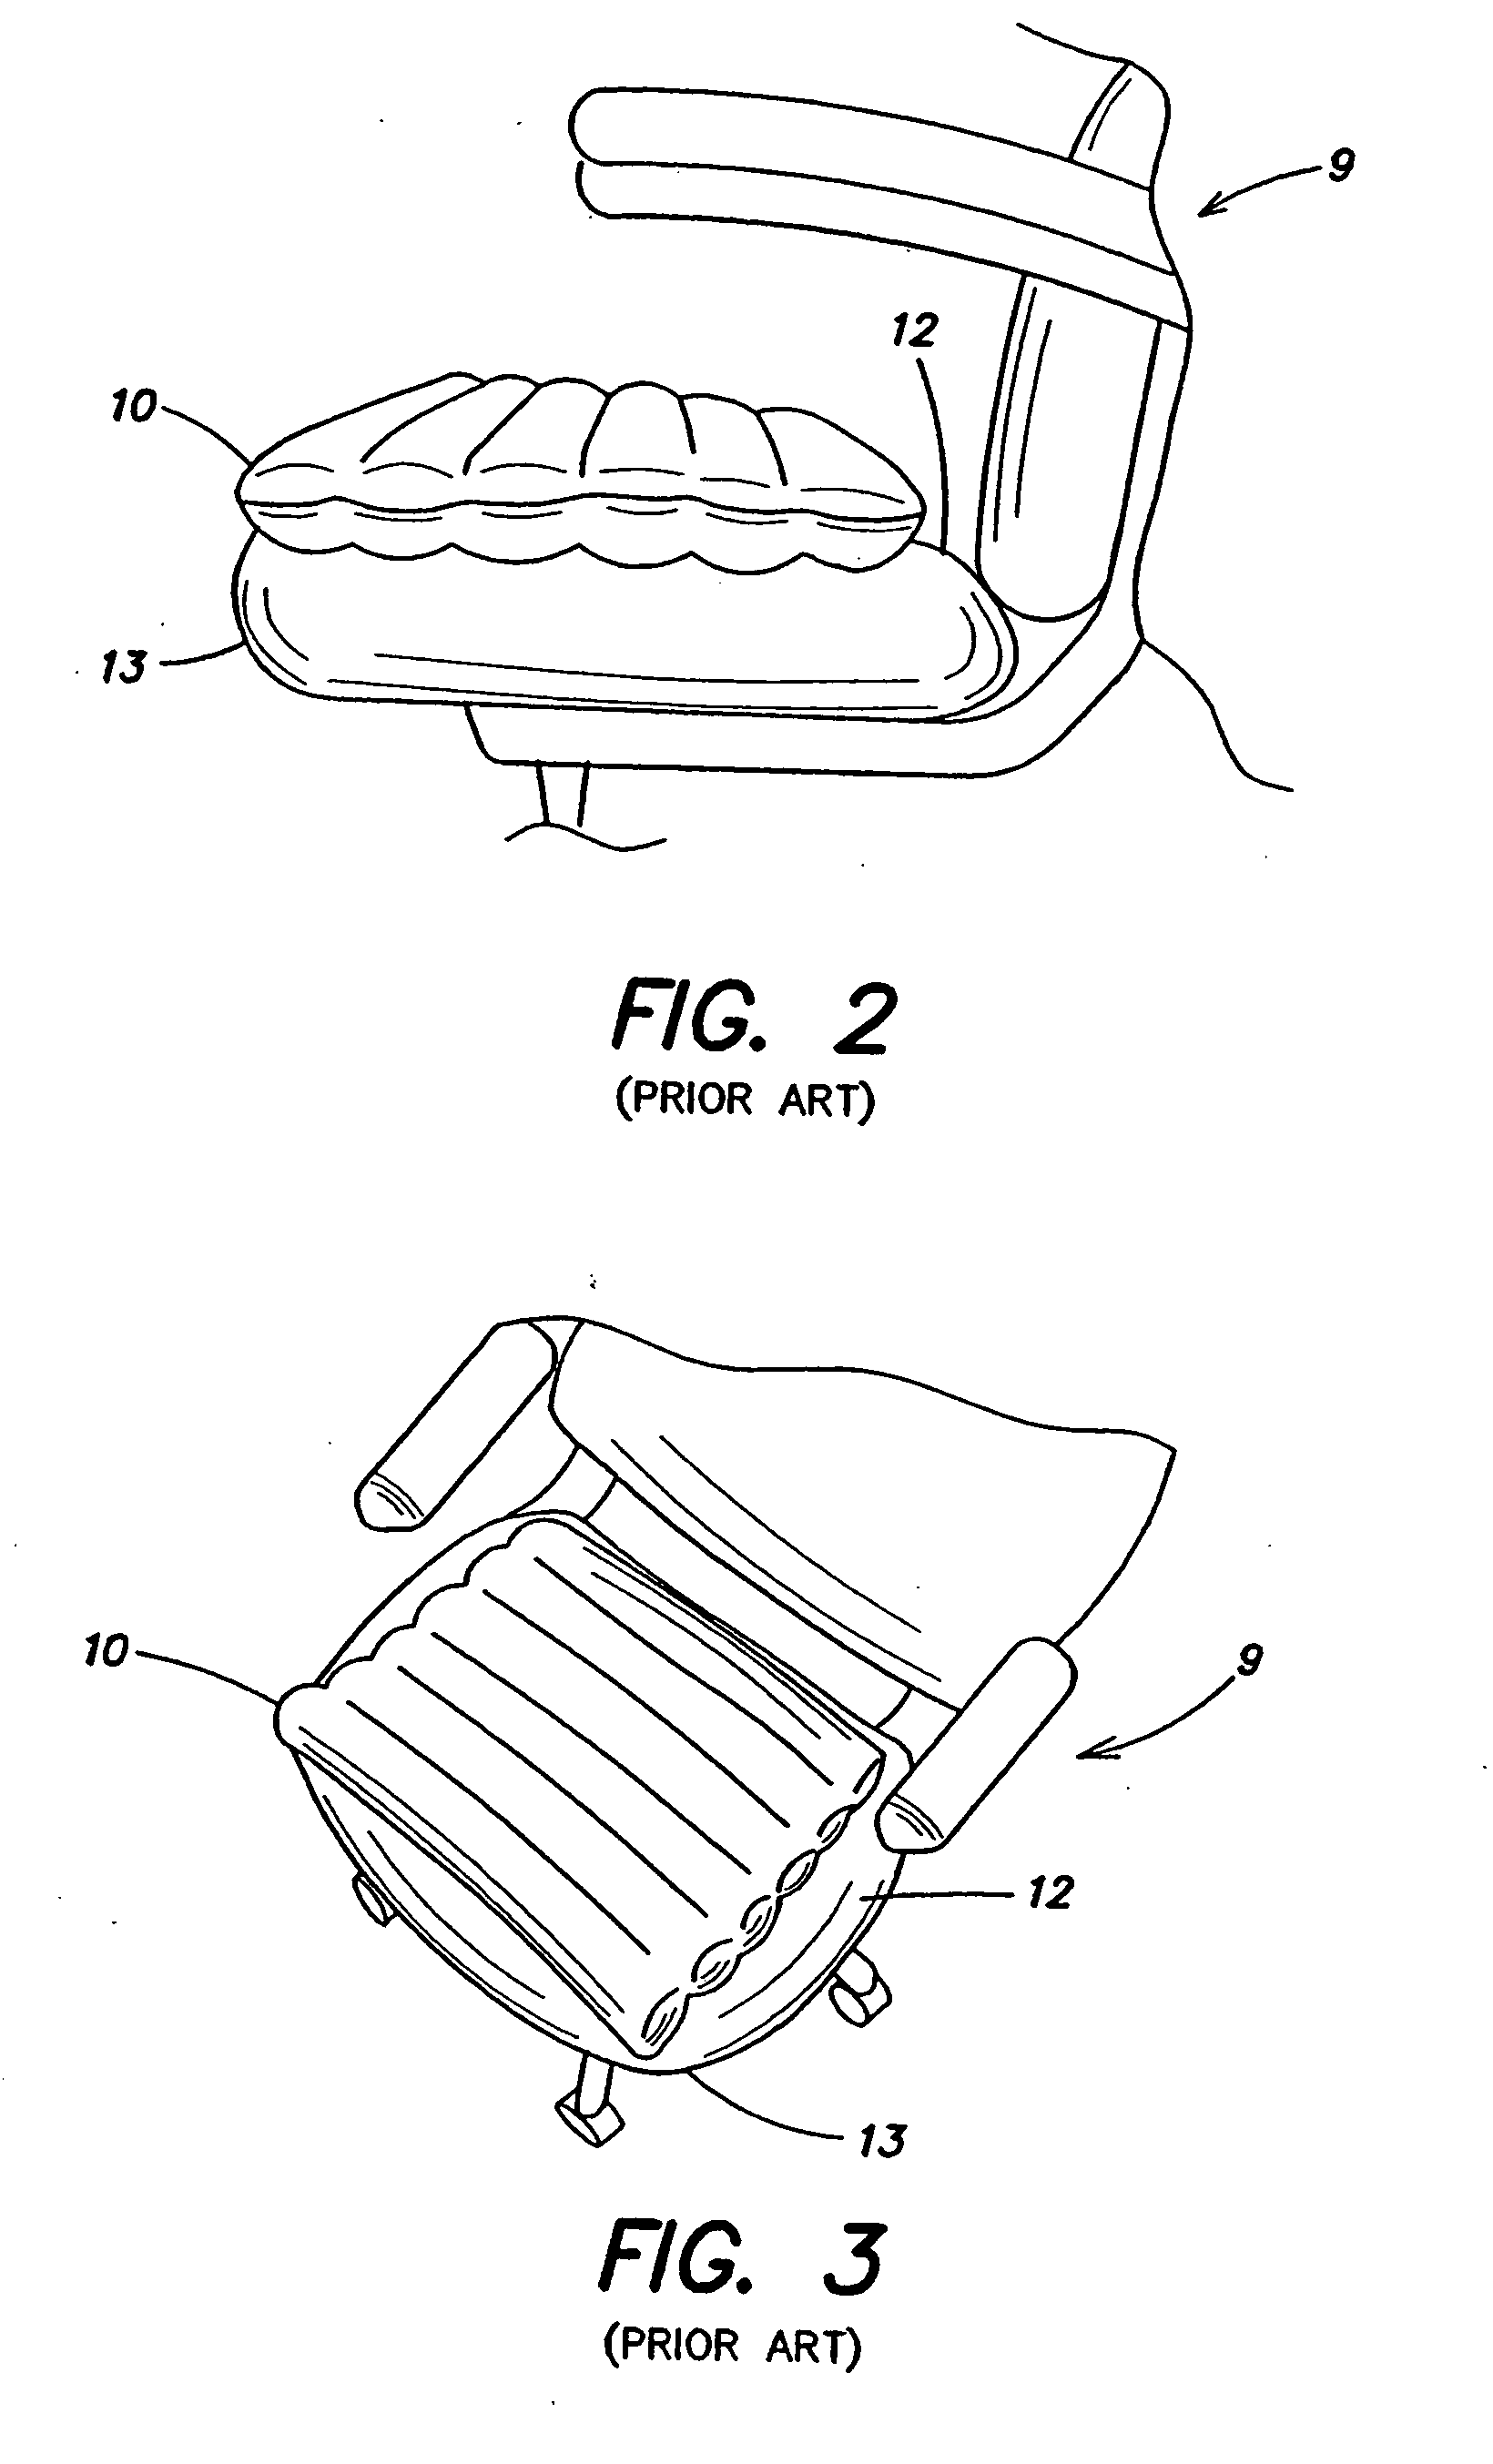 Body support, comfort device